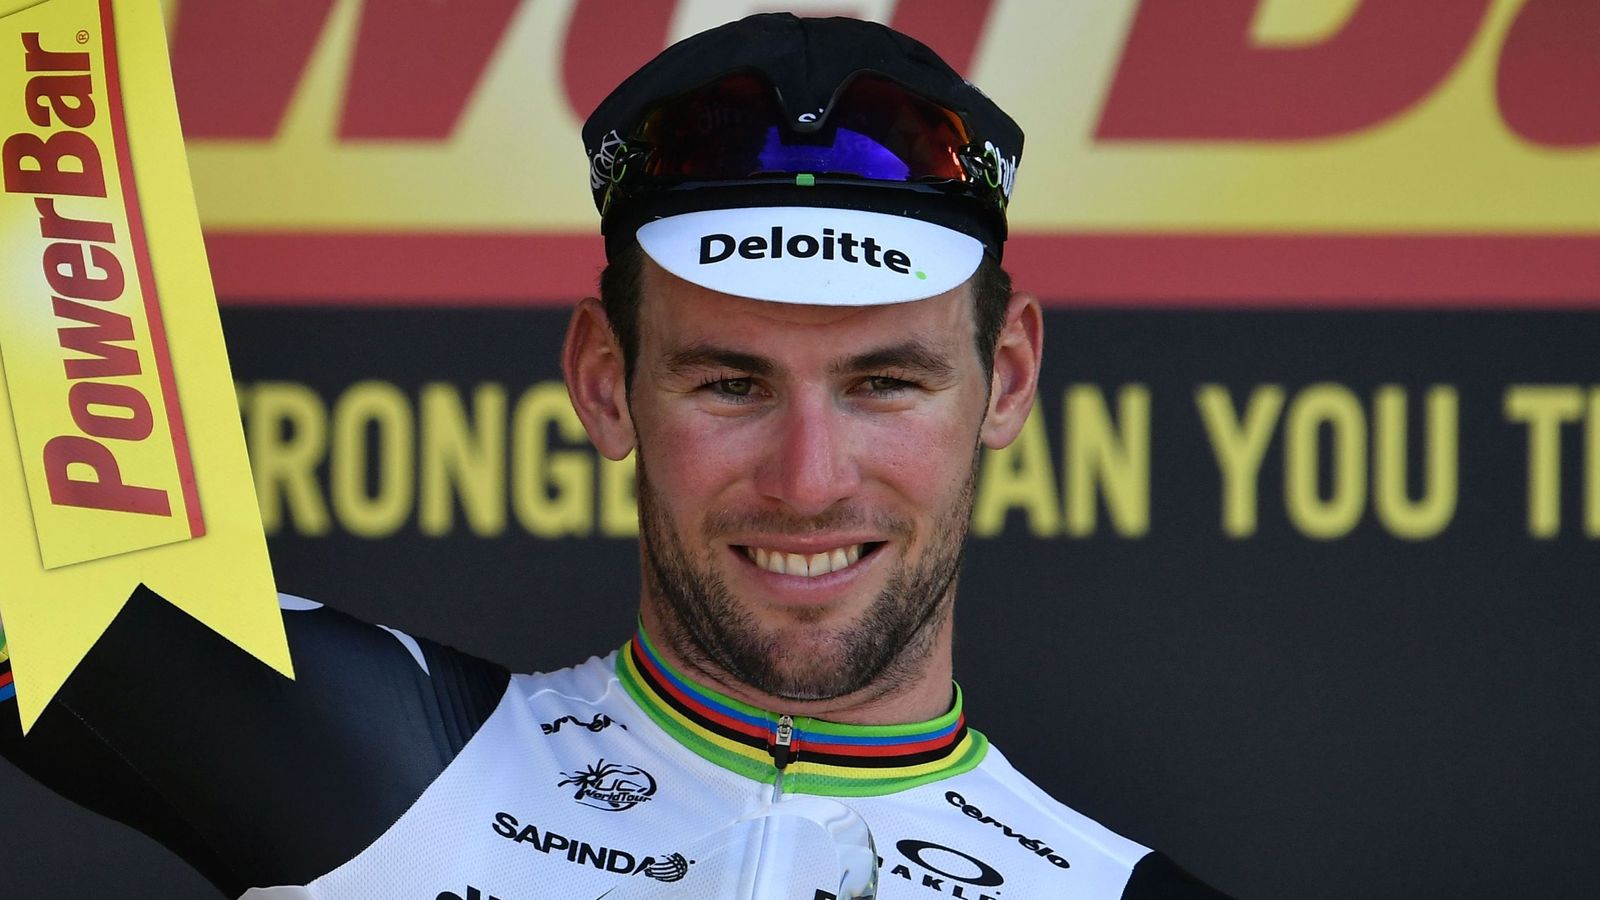 Mark Cavendish leaves Tour de France to prepare for Olympics | Cycling ...